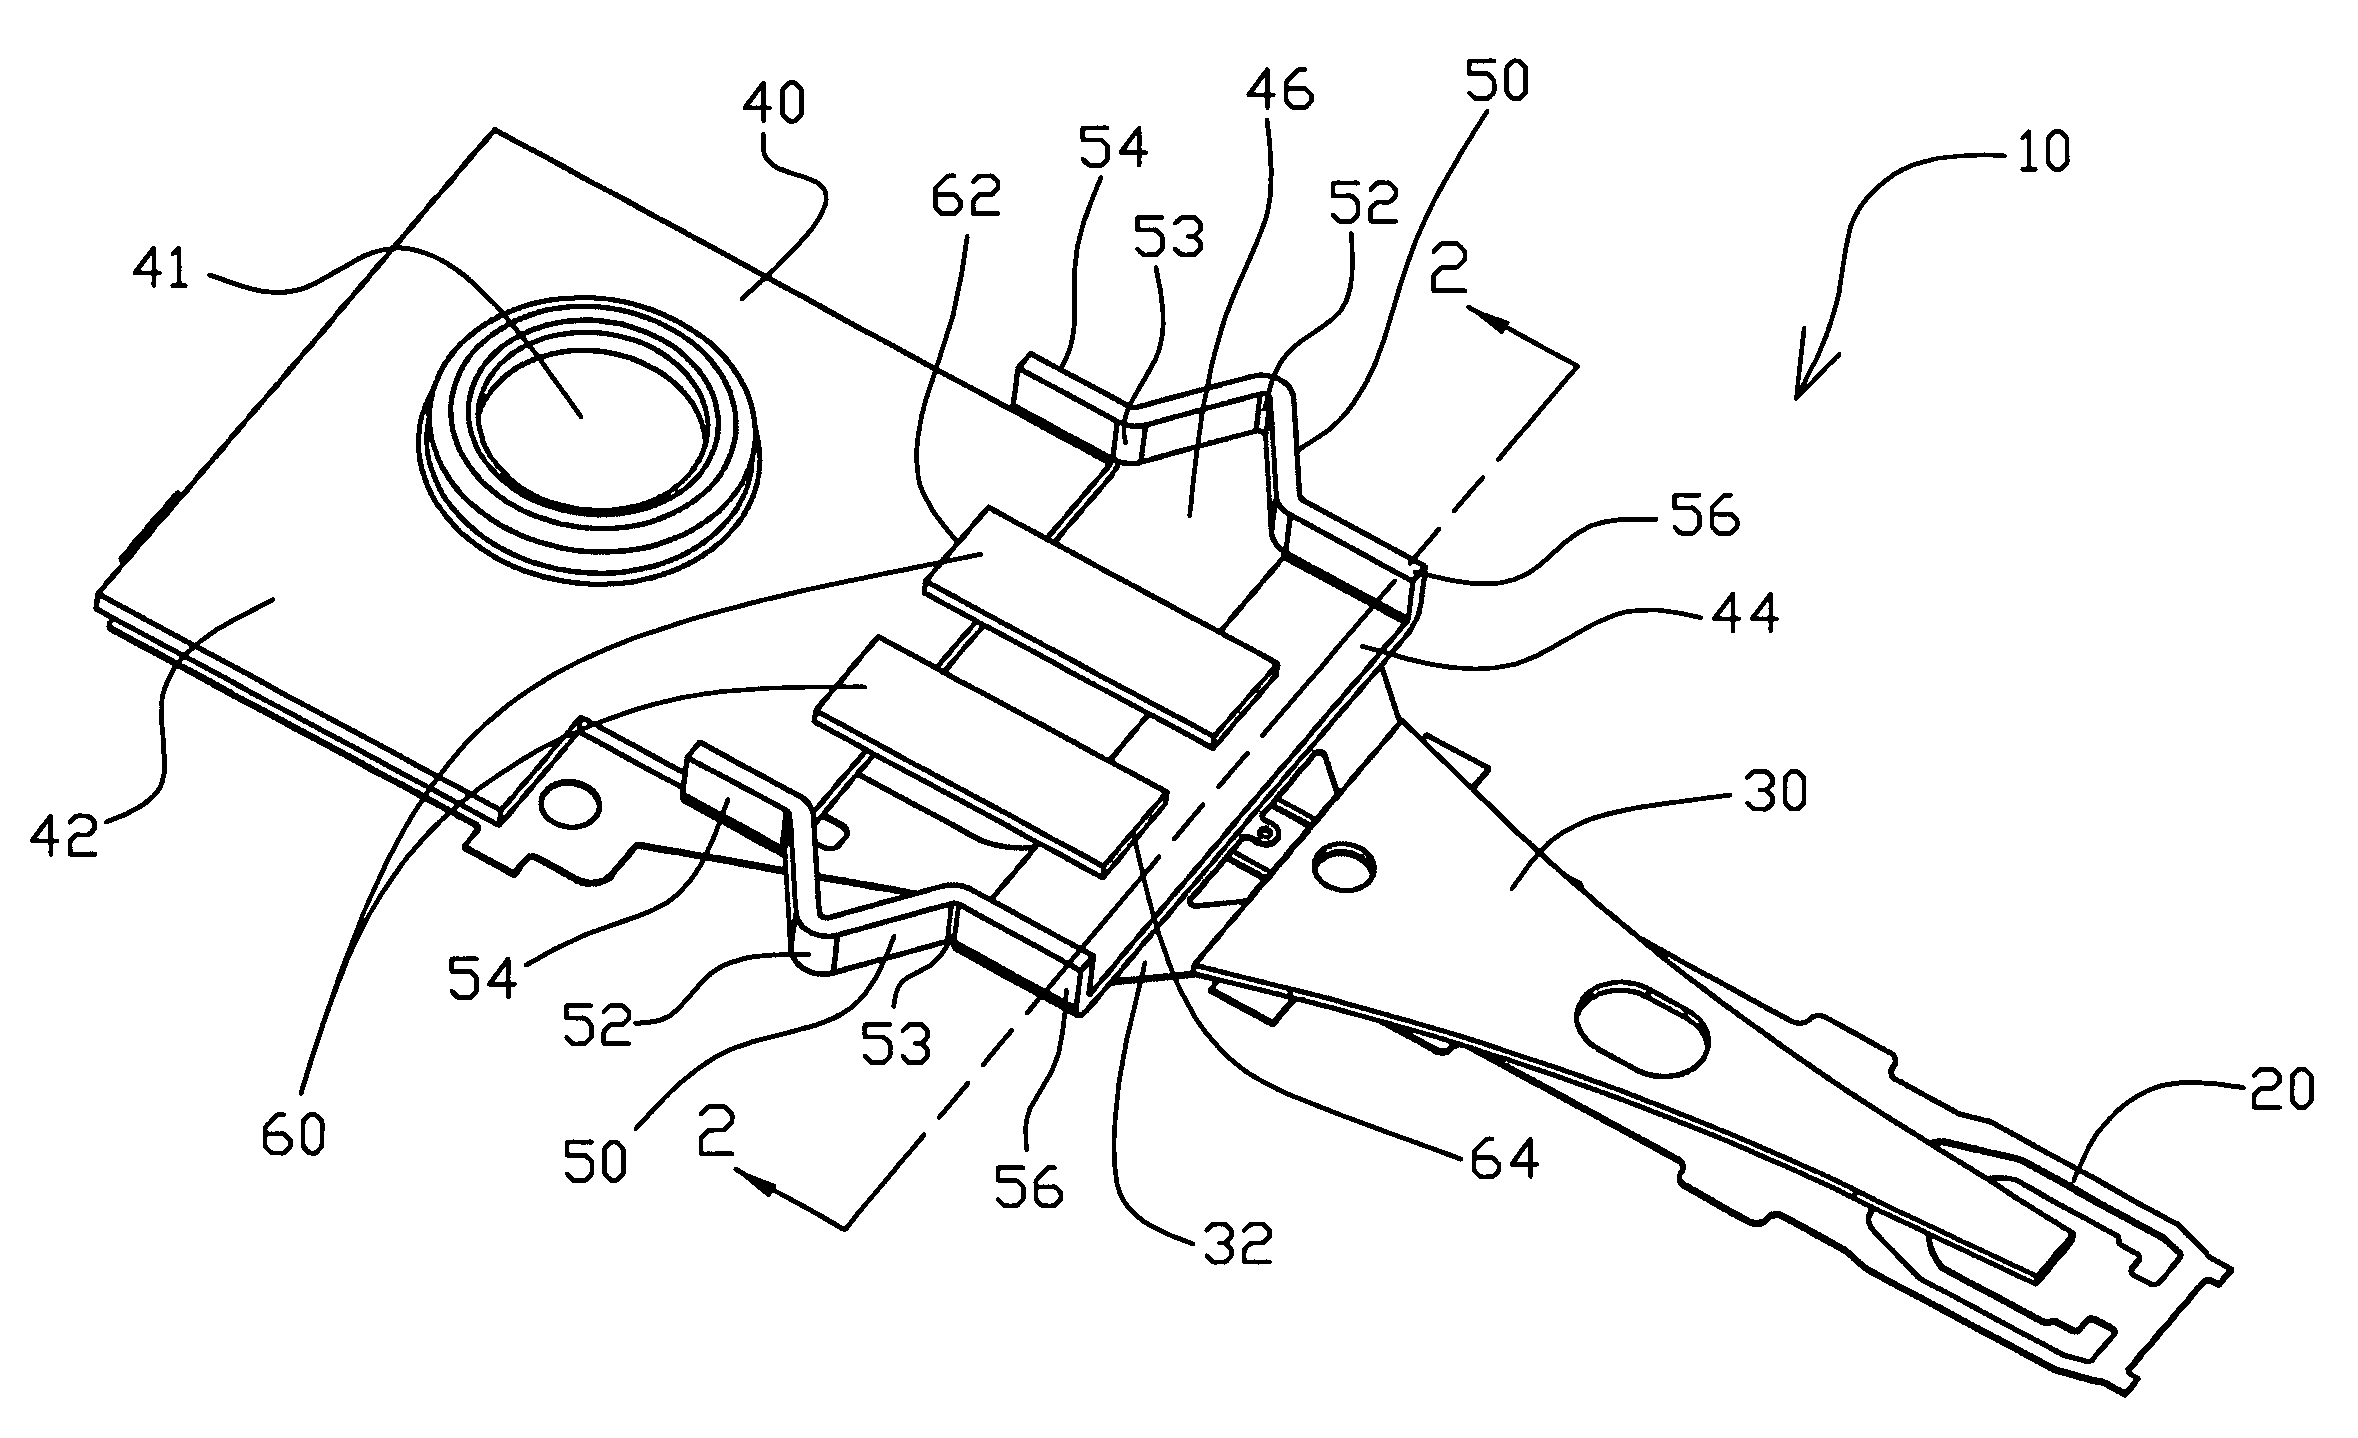 Disk drive head suspension with spring rails for base plate microactuation